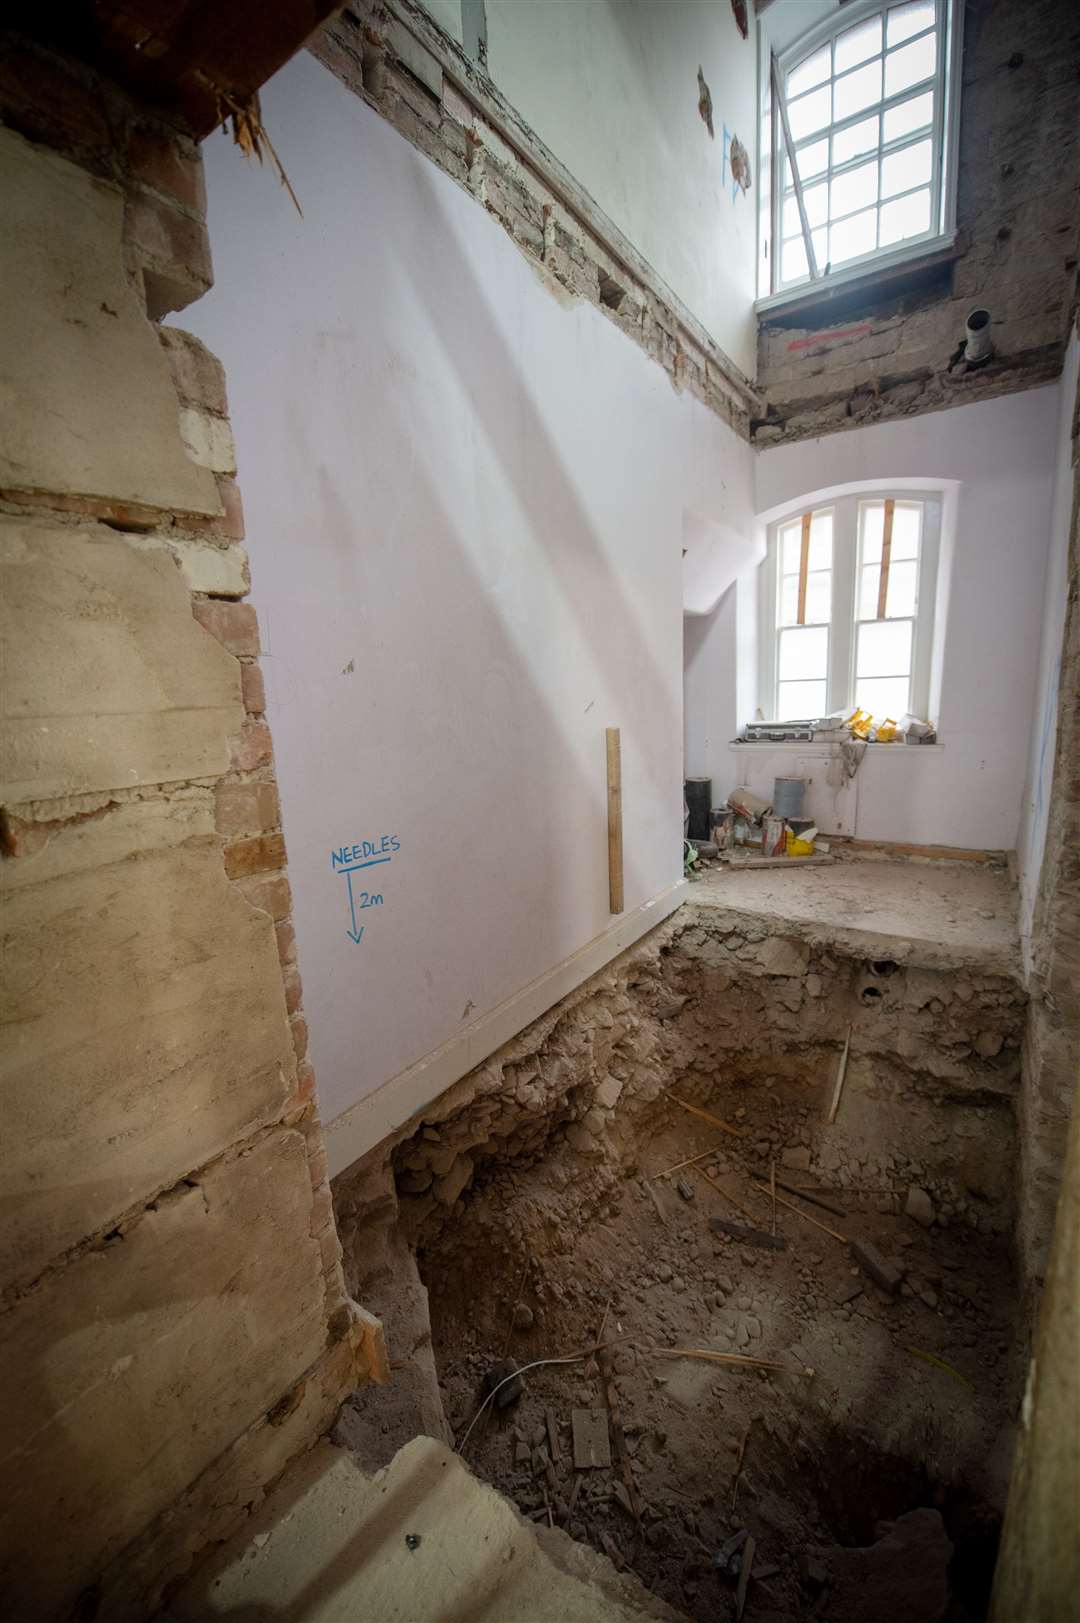 The excavated lift shaft posed difficulties which were overcome. Picture: Callum Mackay.